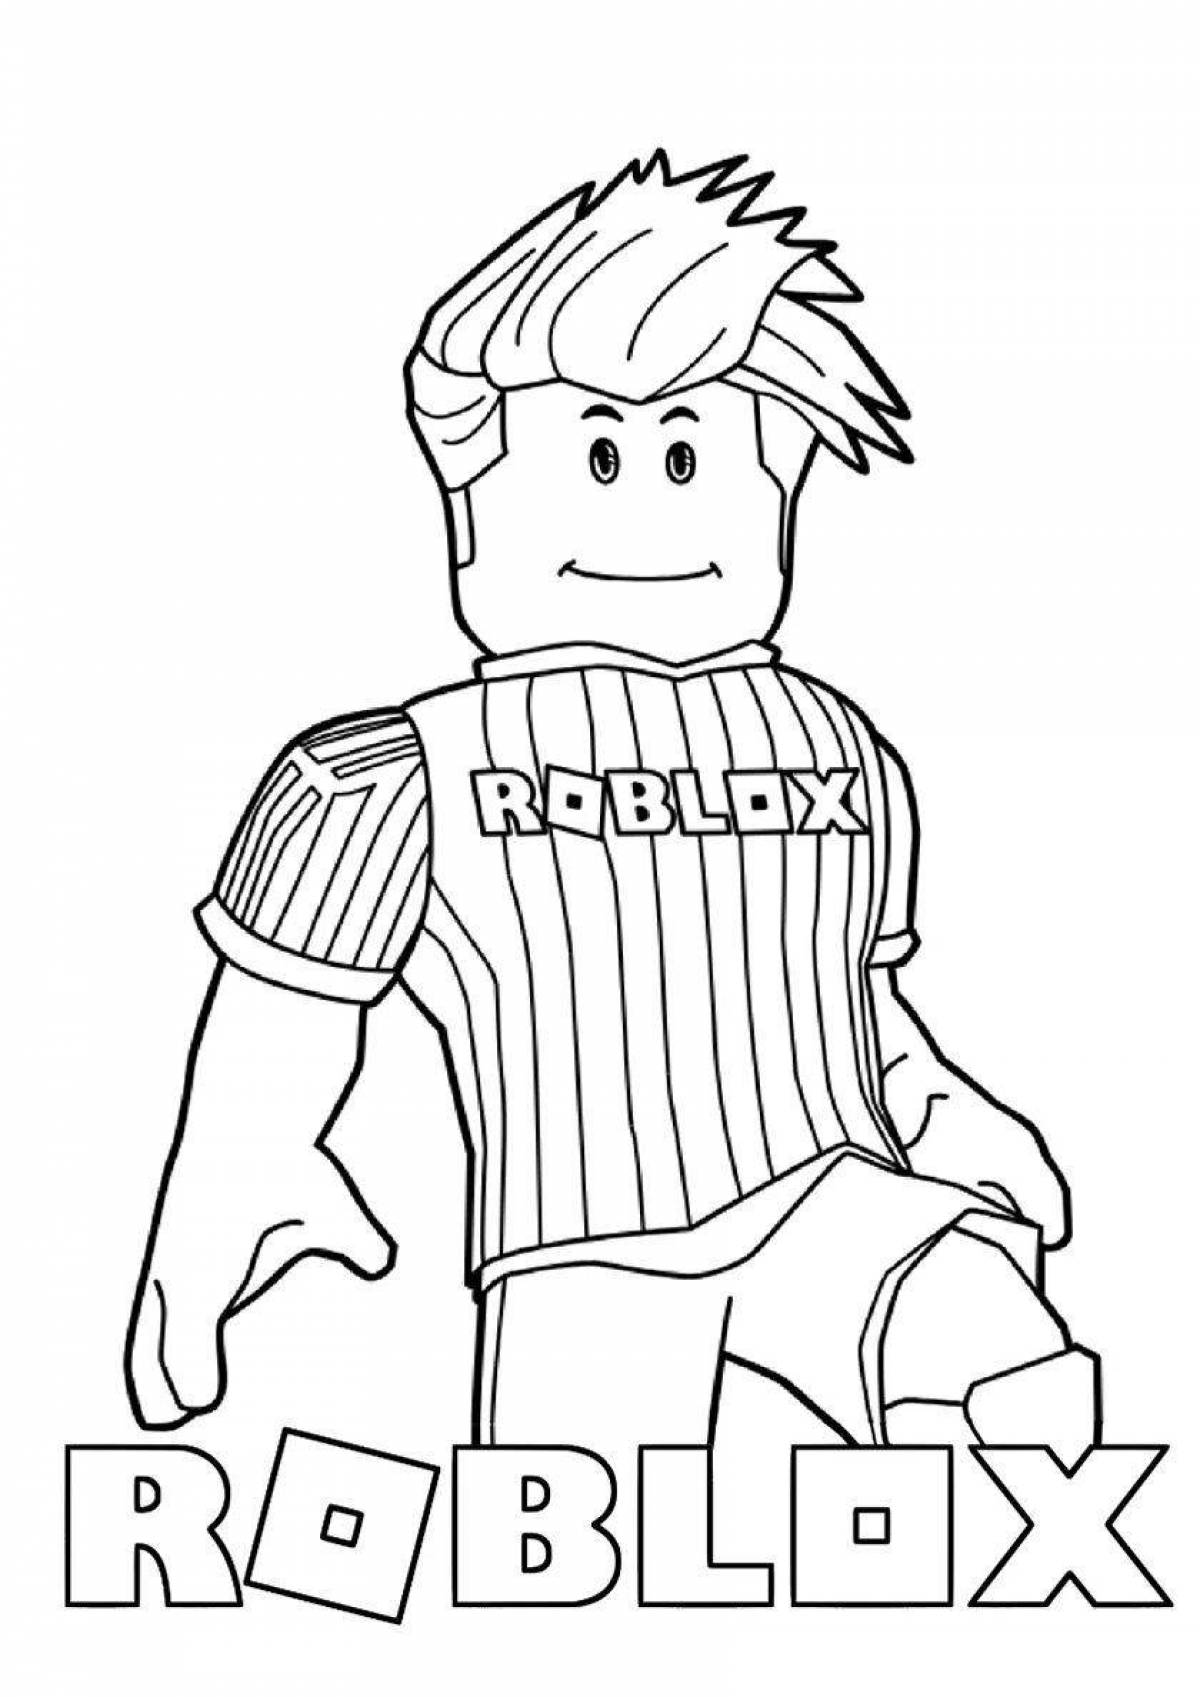 Outstanding roblox coloring book for 10 year old boys